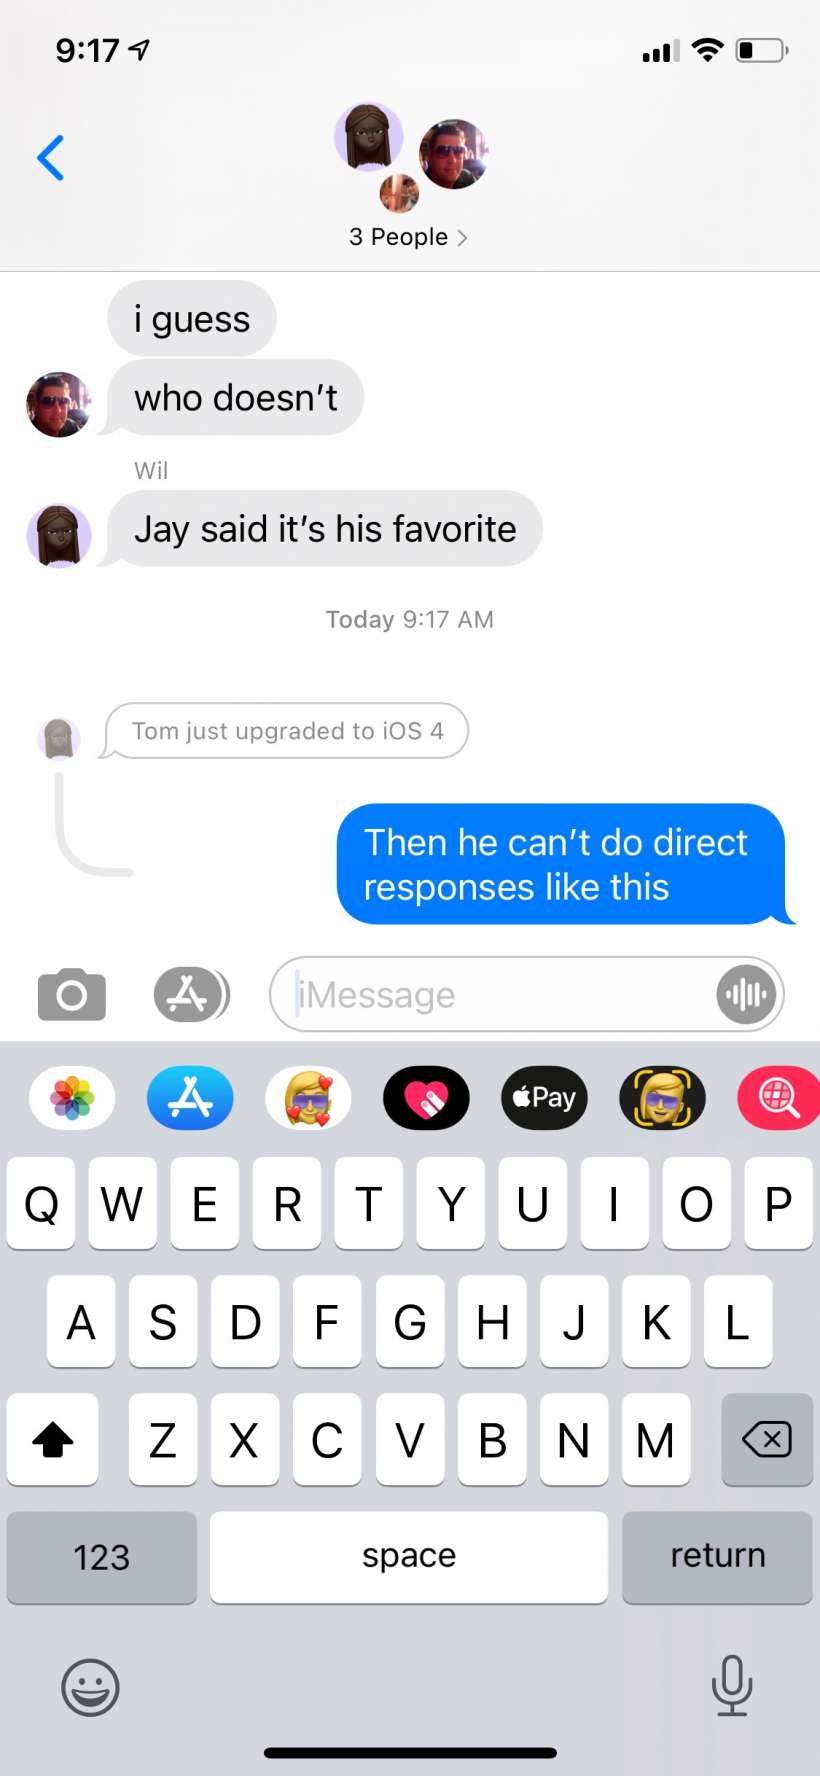 How to respond directly to texts in a group message thread on iPhone and iPad.